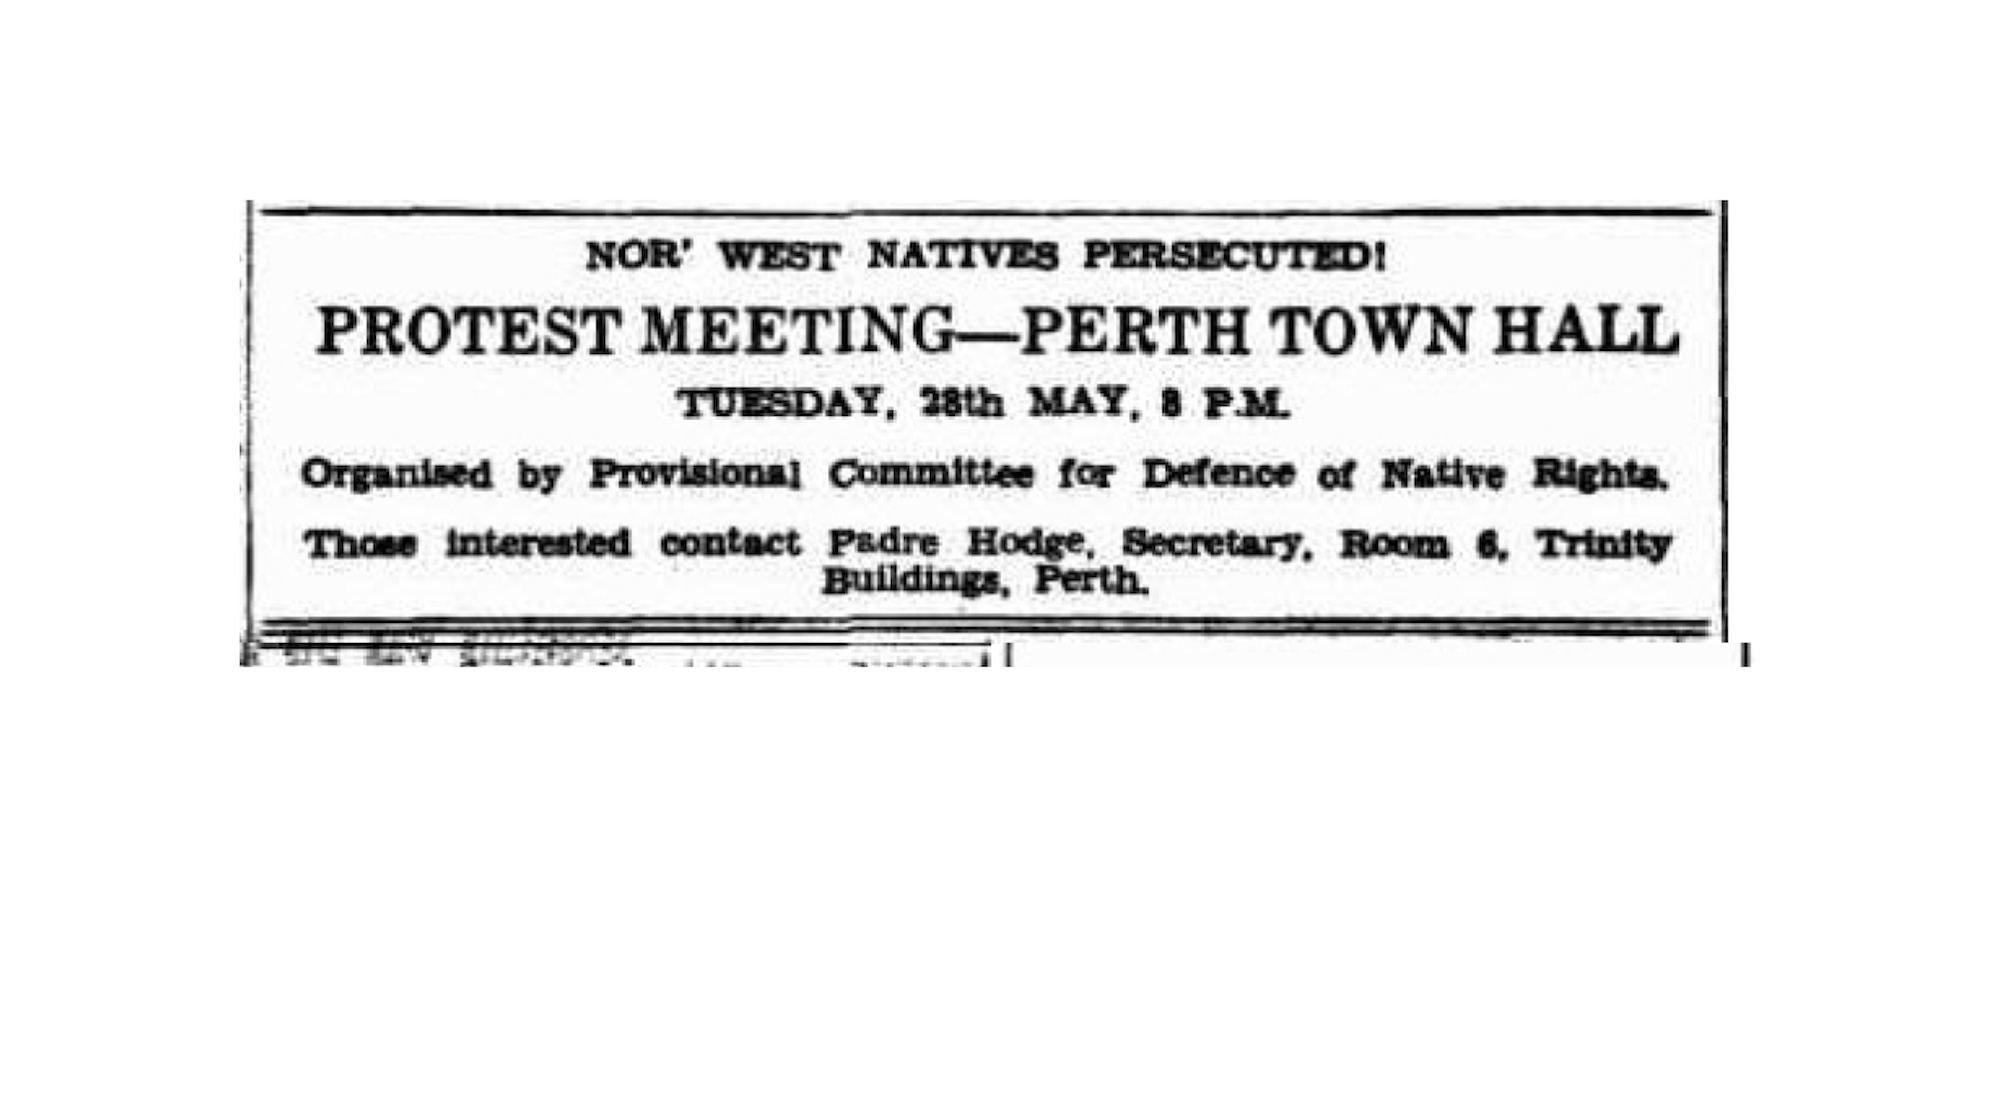 West Australian, 24 May 1946, advertisement ‘Nor’ West Natives Persecuted.’